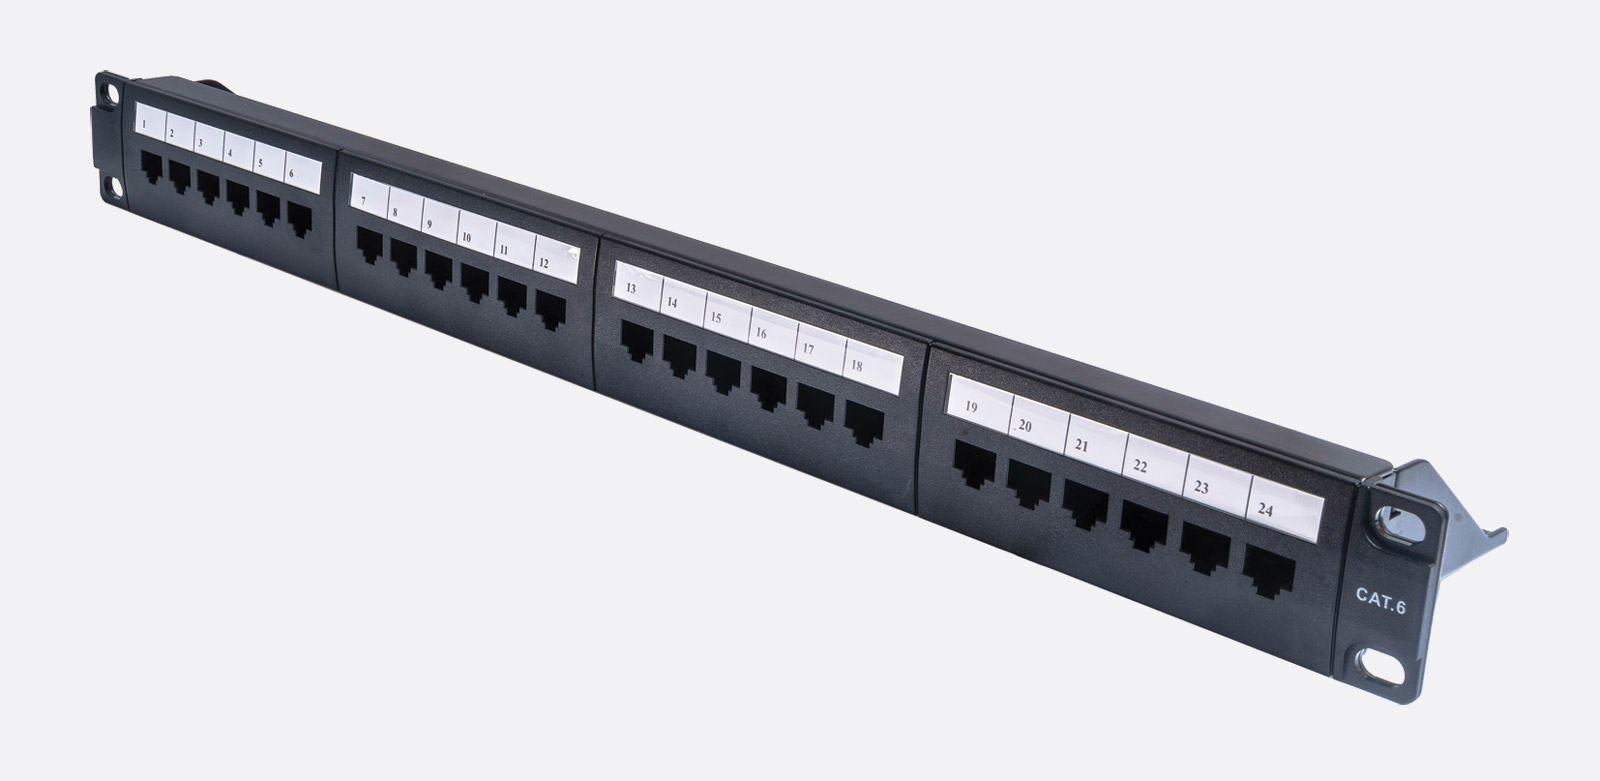 24 way patch panel